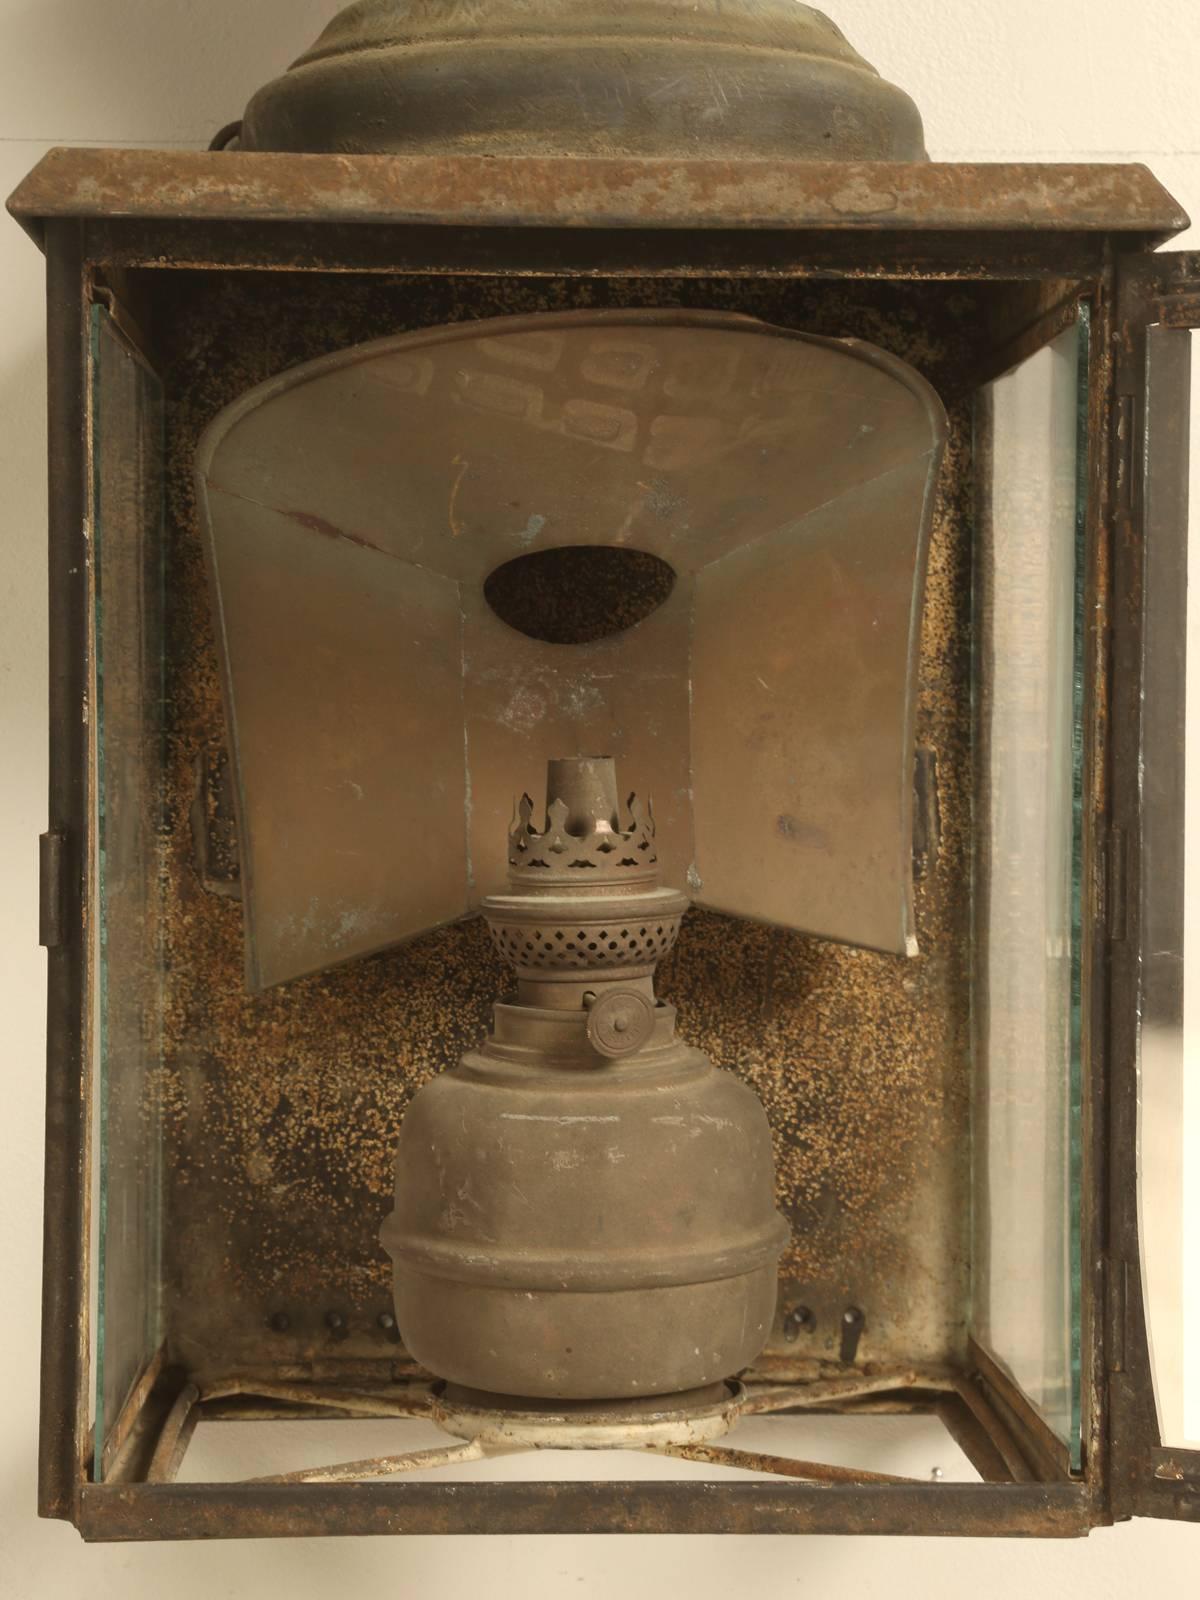 Late 19th Century Antique French Gillet & Forest Kerosene Lanterns from the 1800s